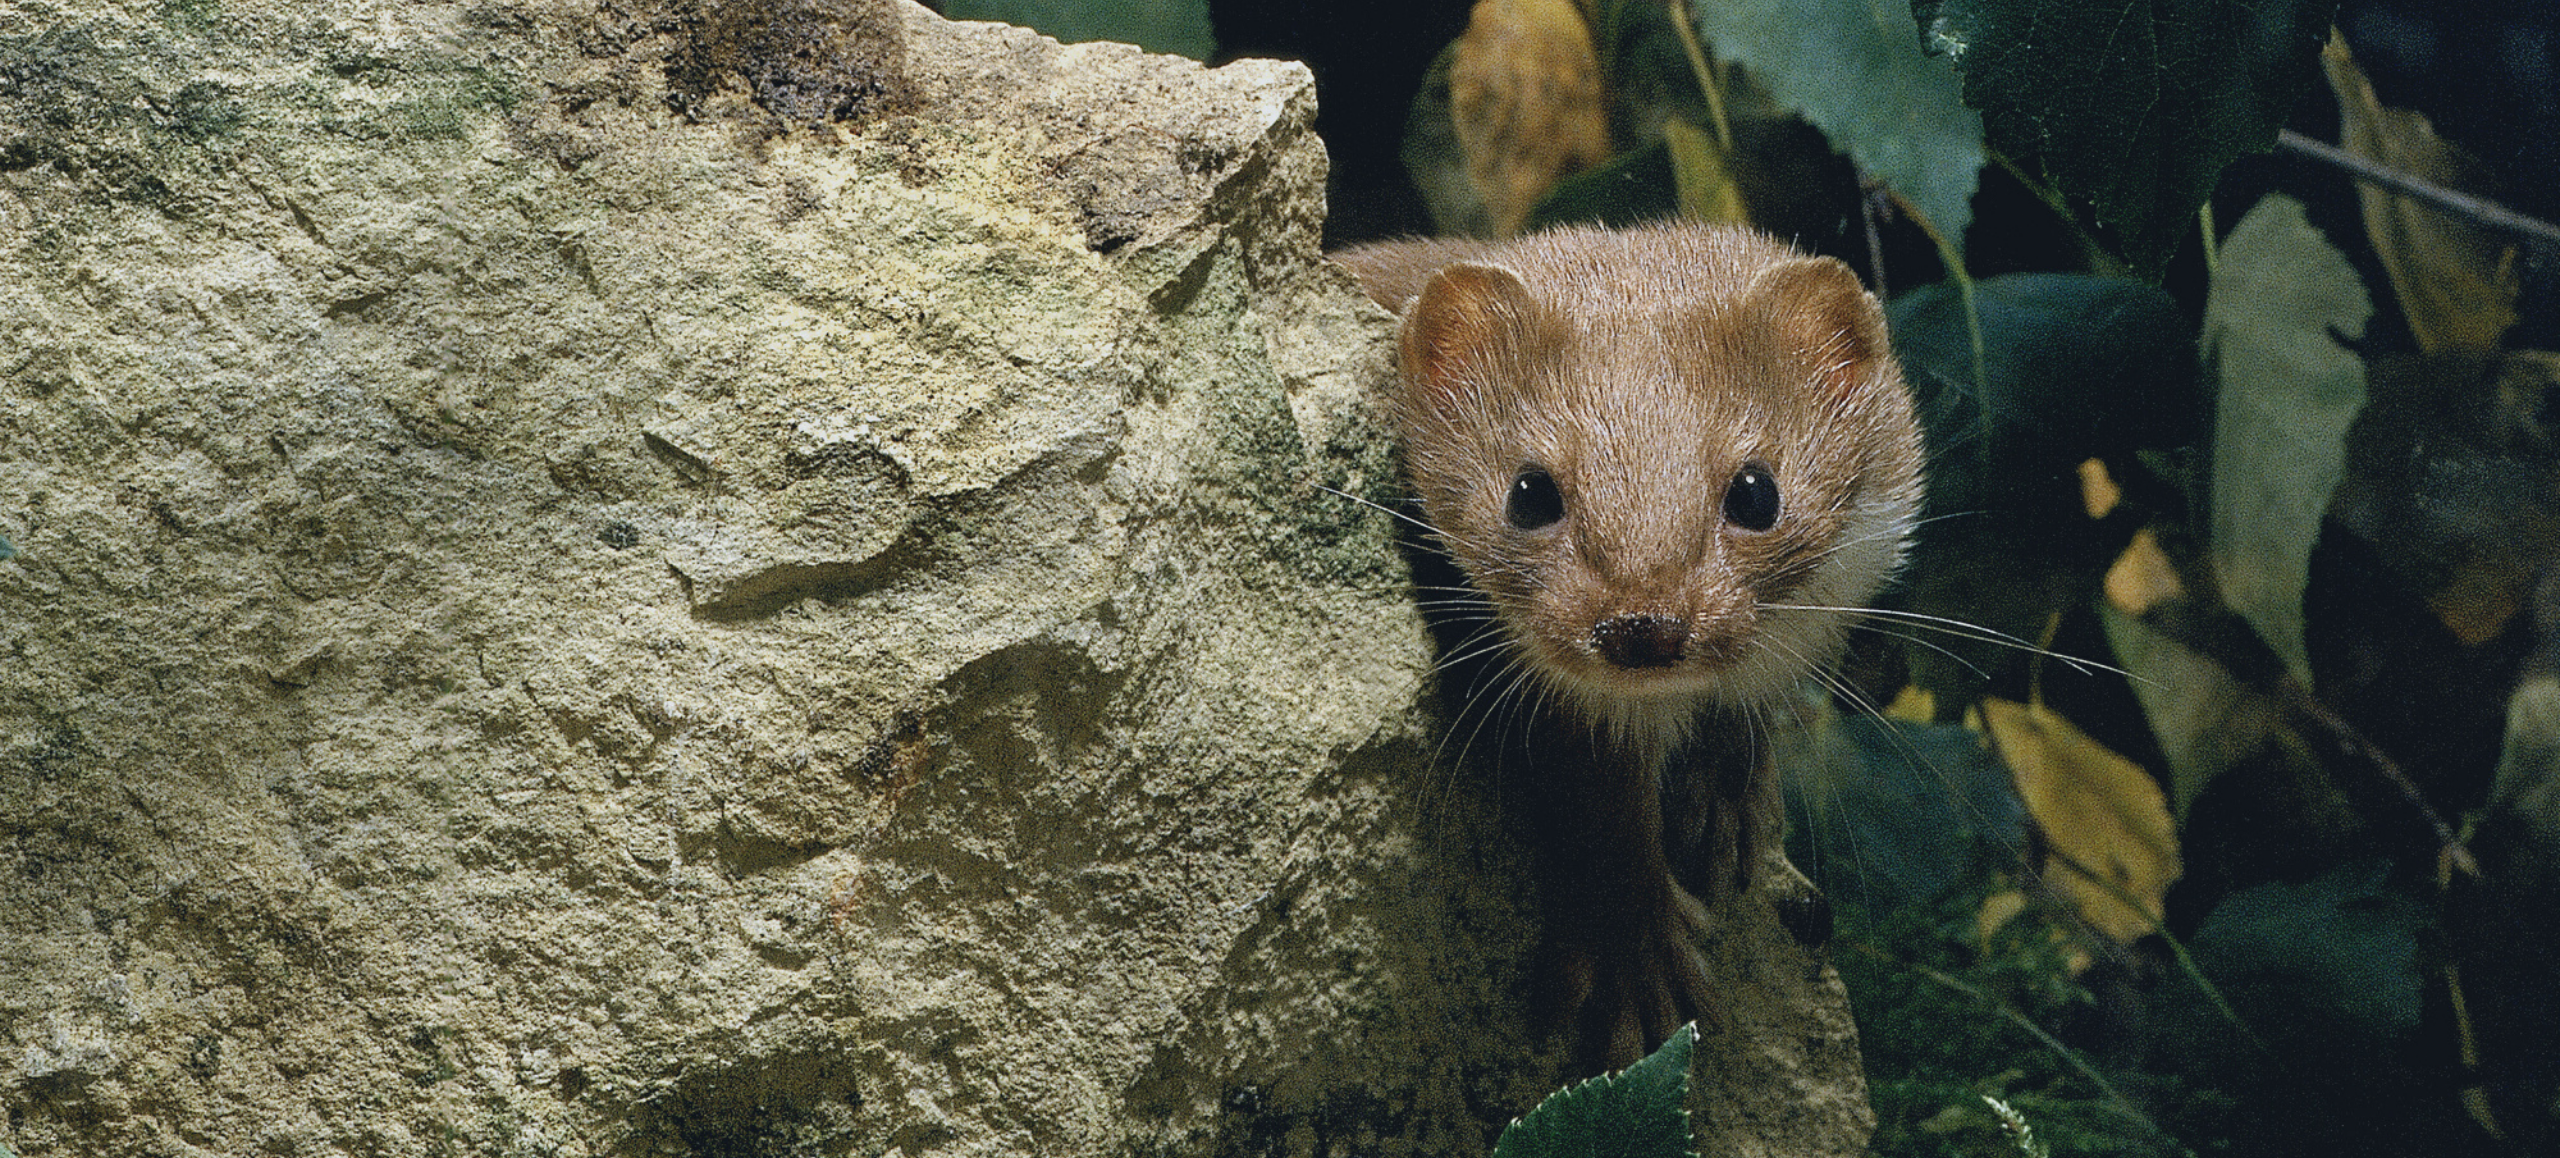 weasel hiding next to a rock surrounded by leaves